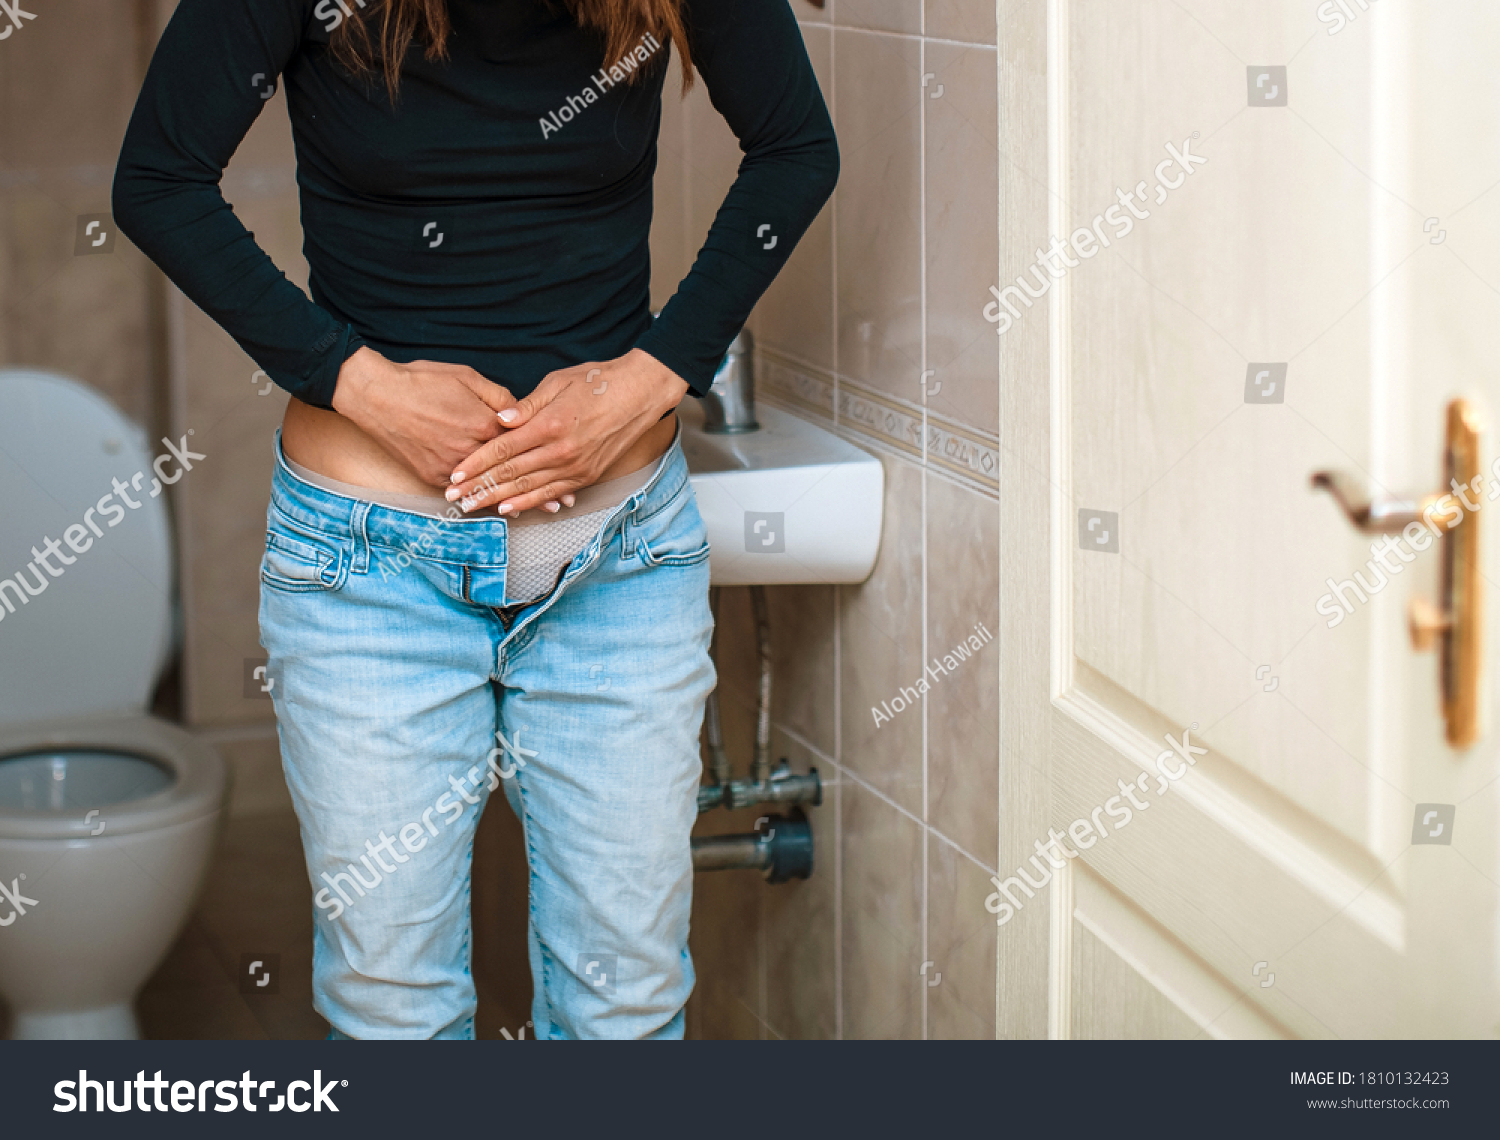 wife peeing in tolet